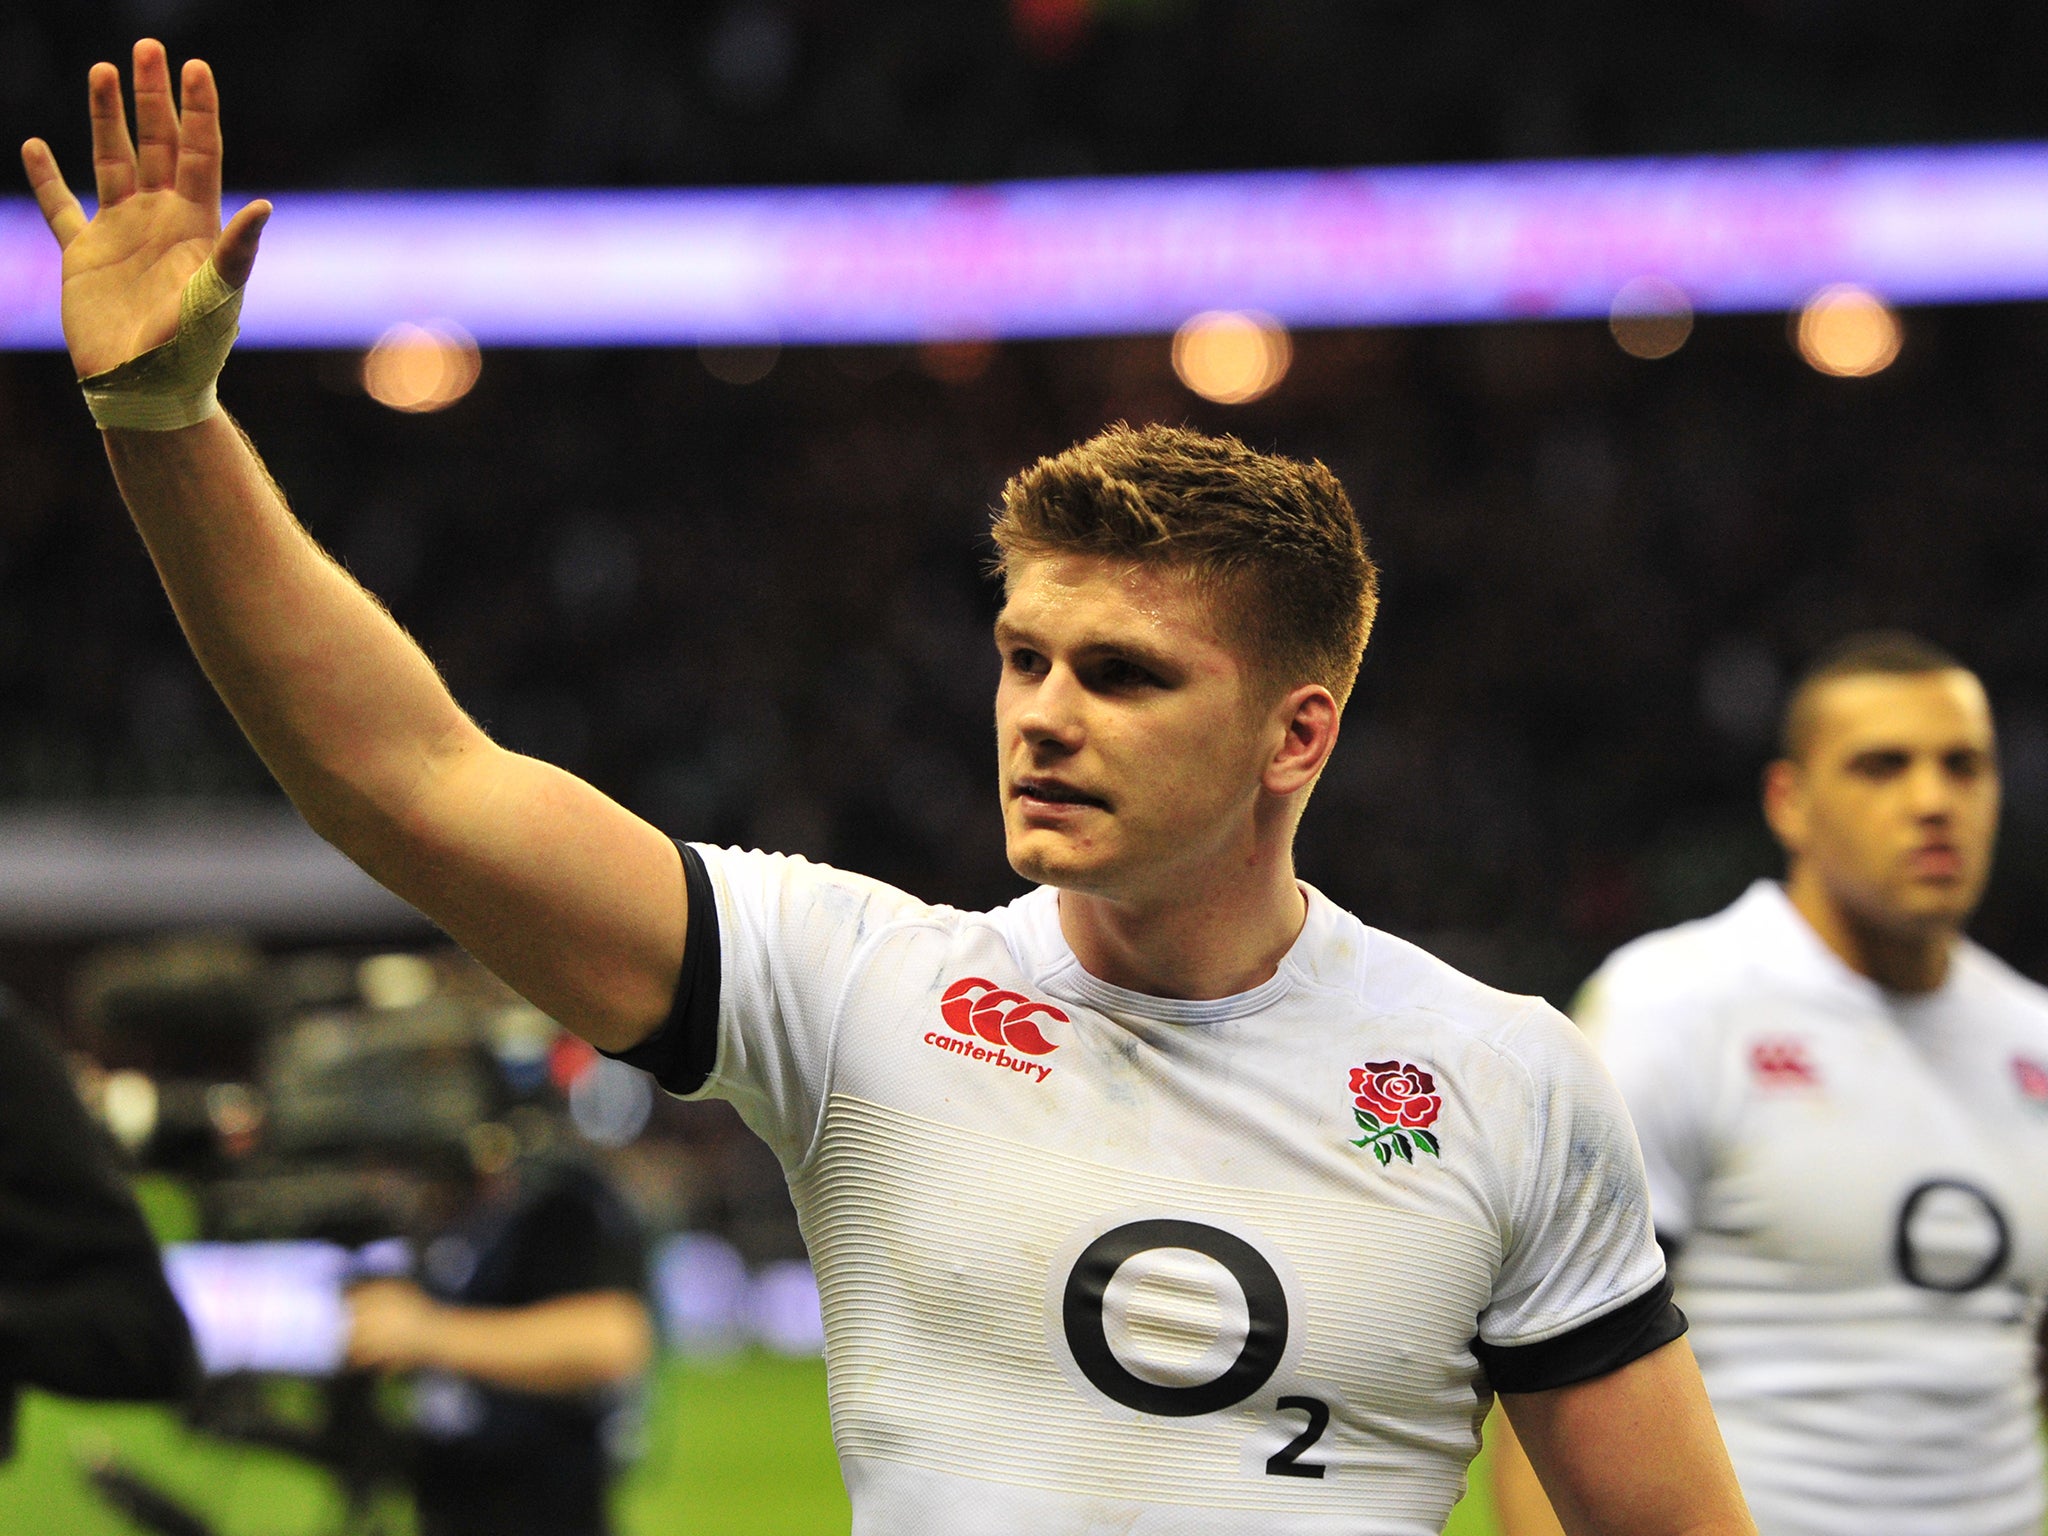 Owen Farrell needs to prove his fitness ahead of next month’s savagely testing international programme at Twickenham